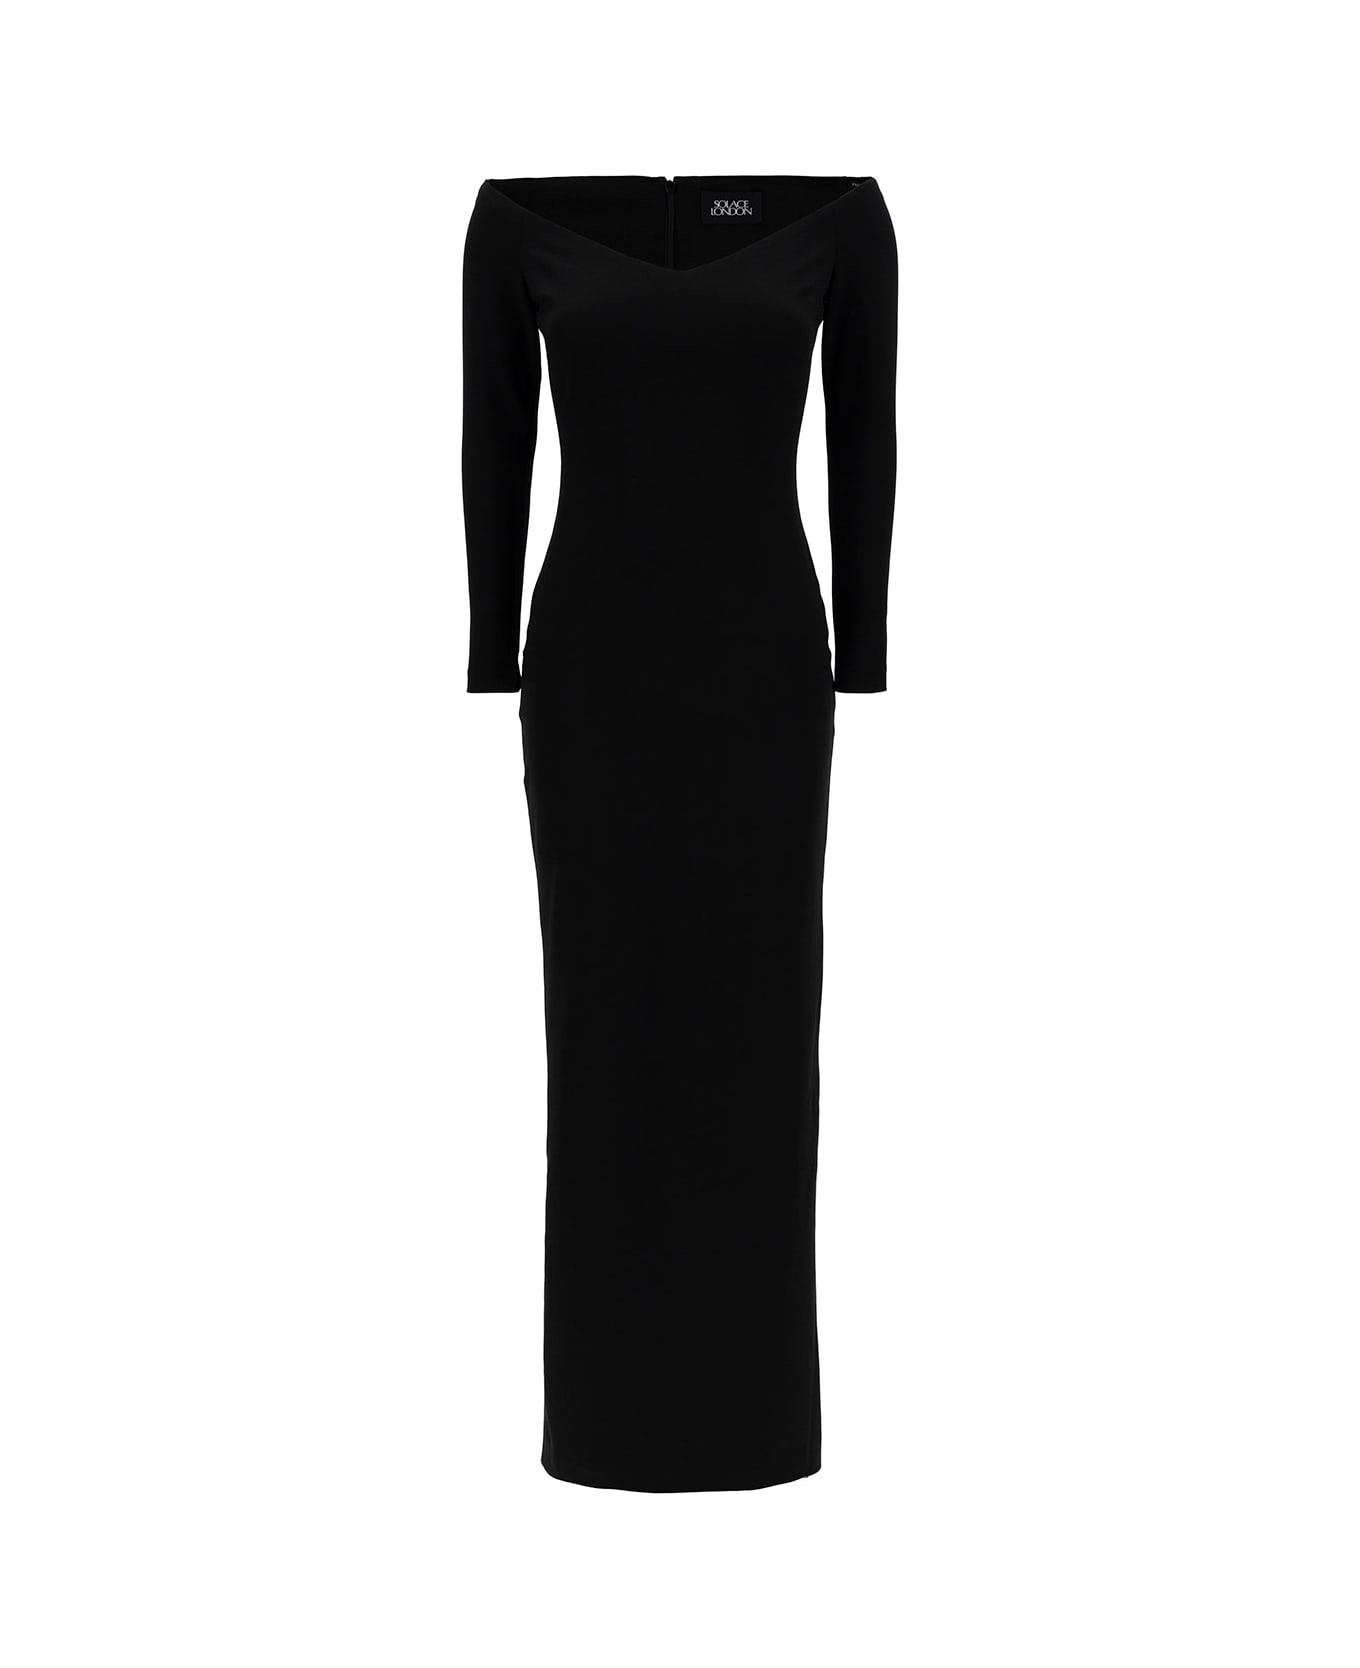 Solace London 'tara' Maxi Black Dress With Off-shoulder Neck In Stretch Fabric Woman - Black